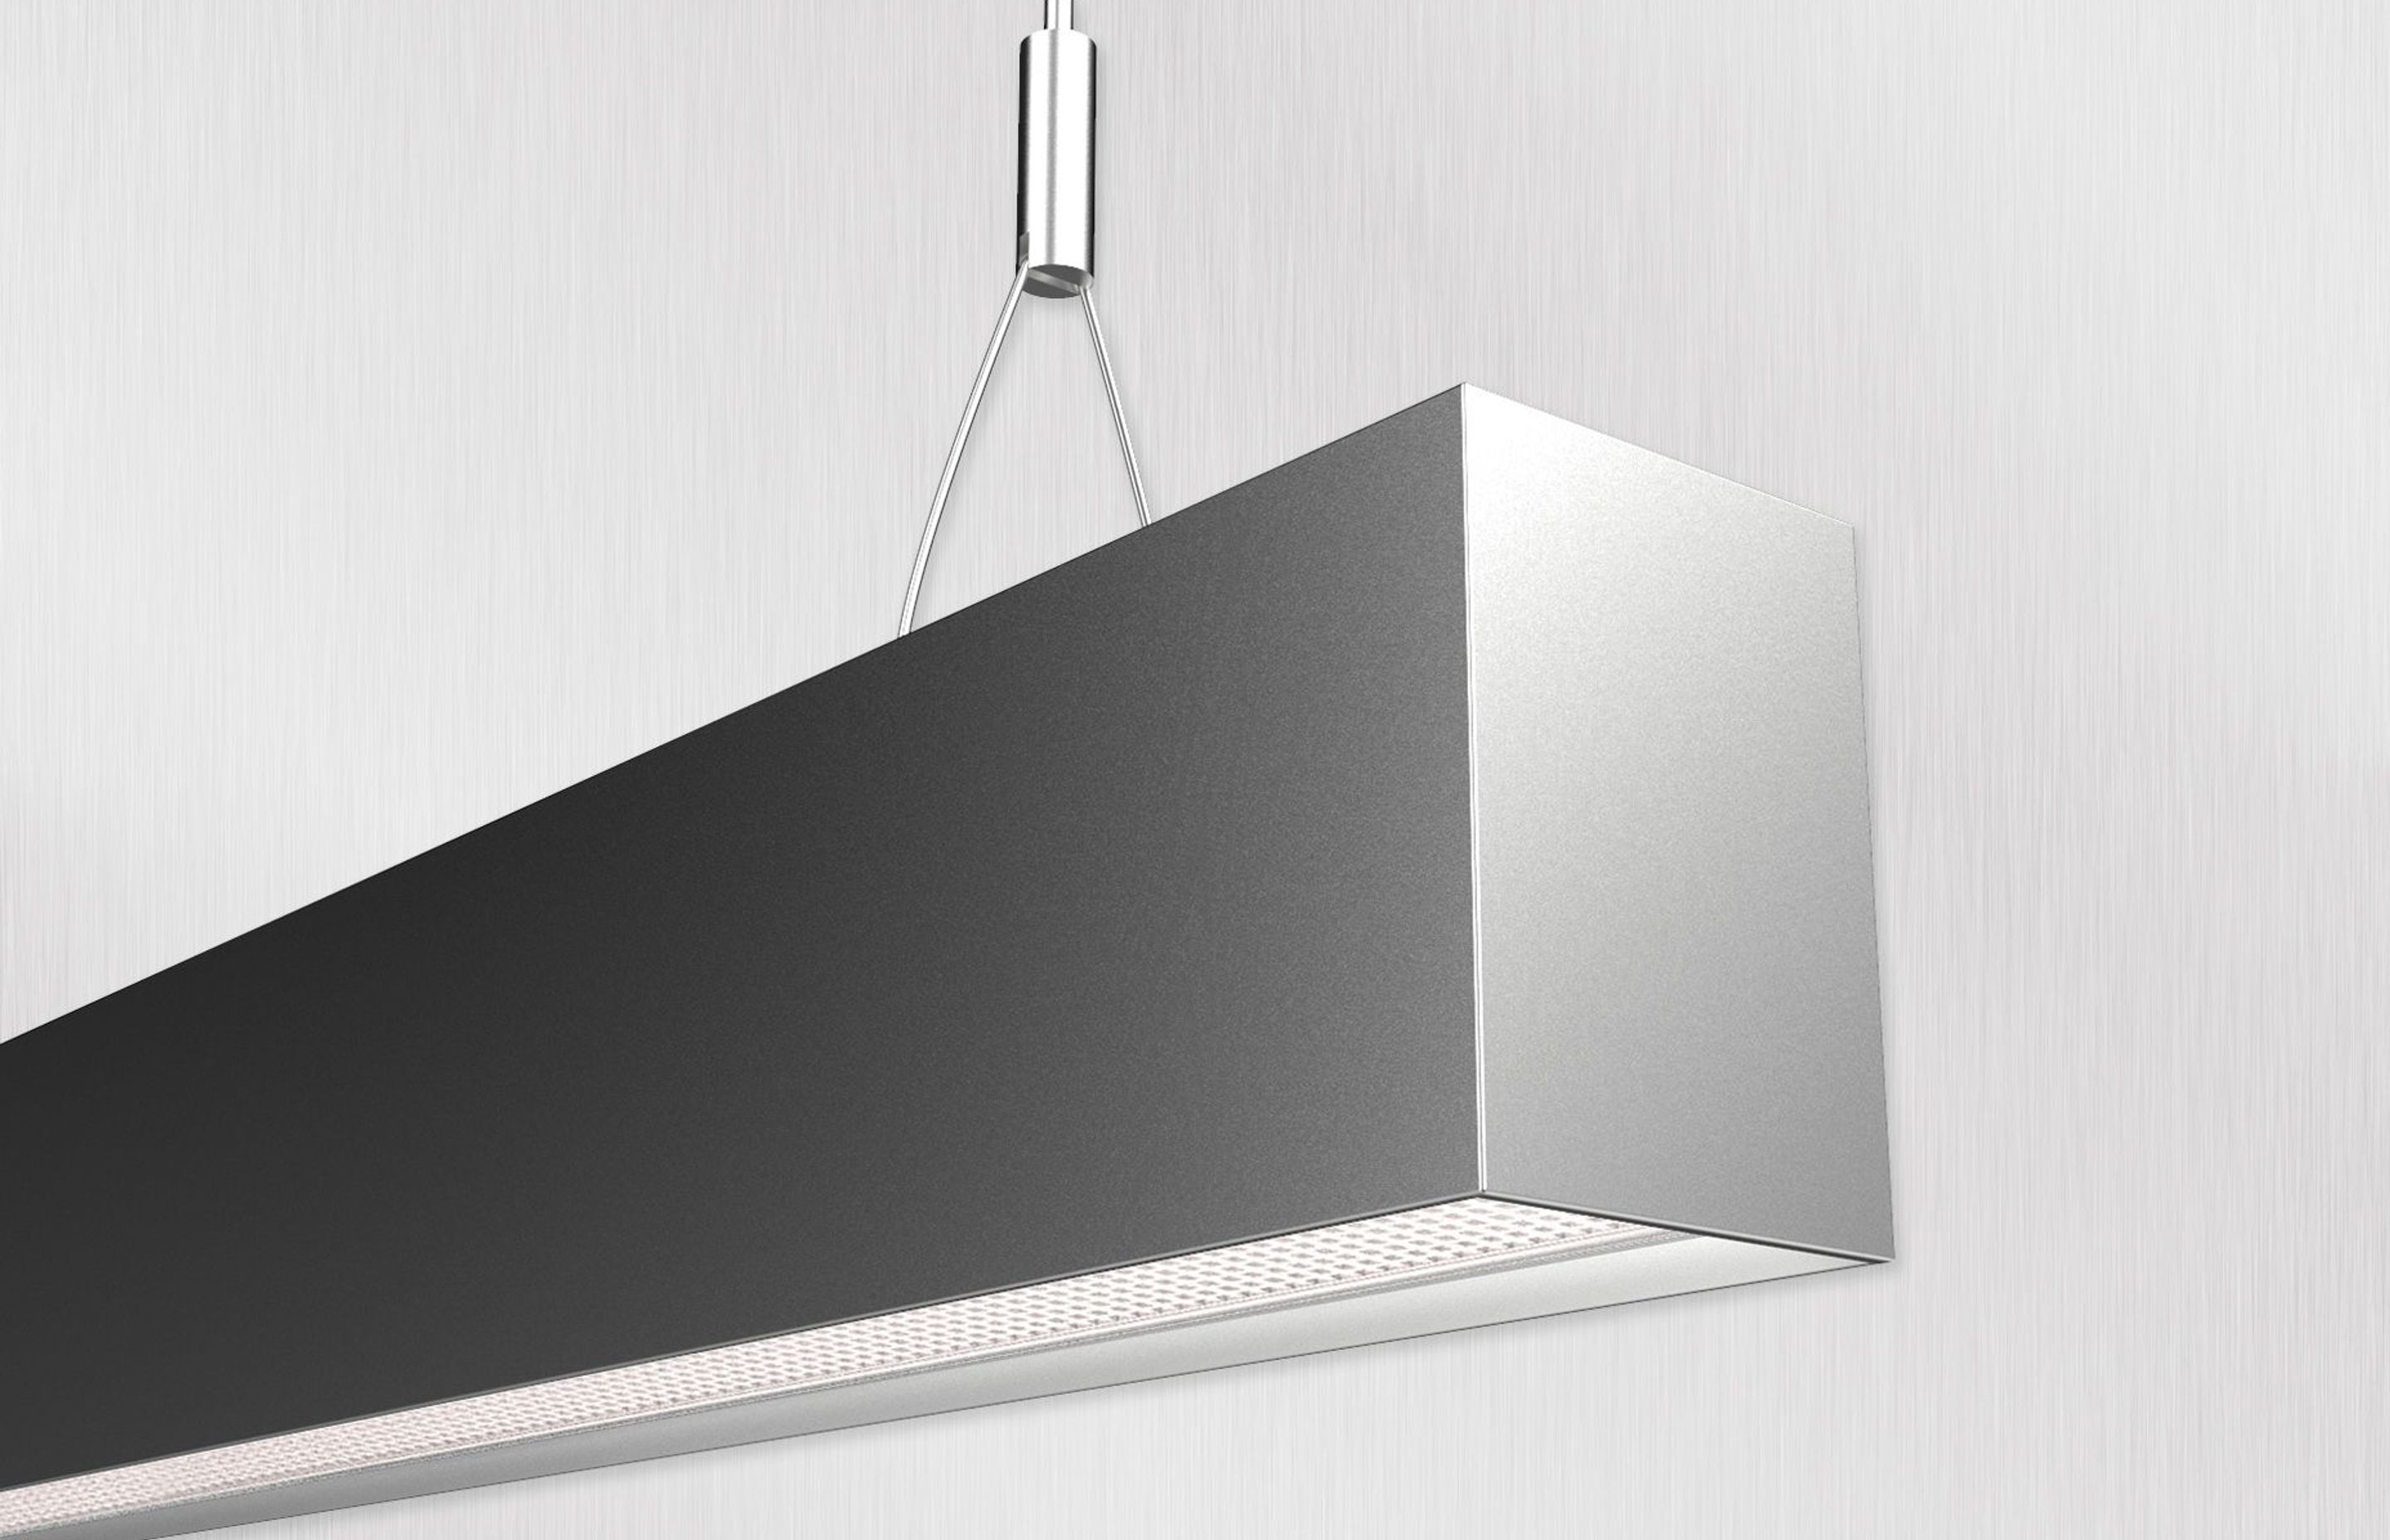 With the silver anodised finish, the result is a sleek, contemporary luminaire suited to a range of applications.